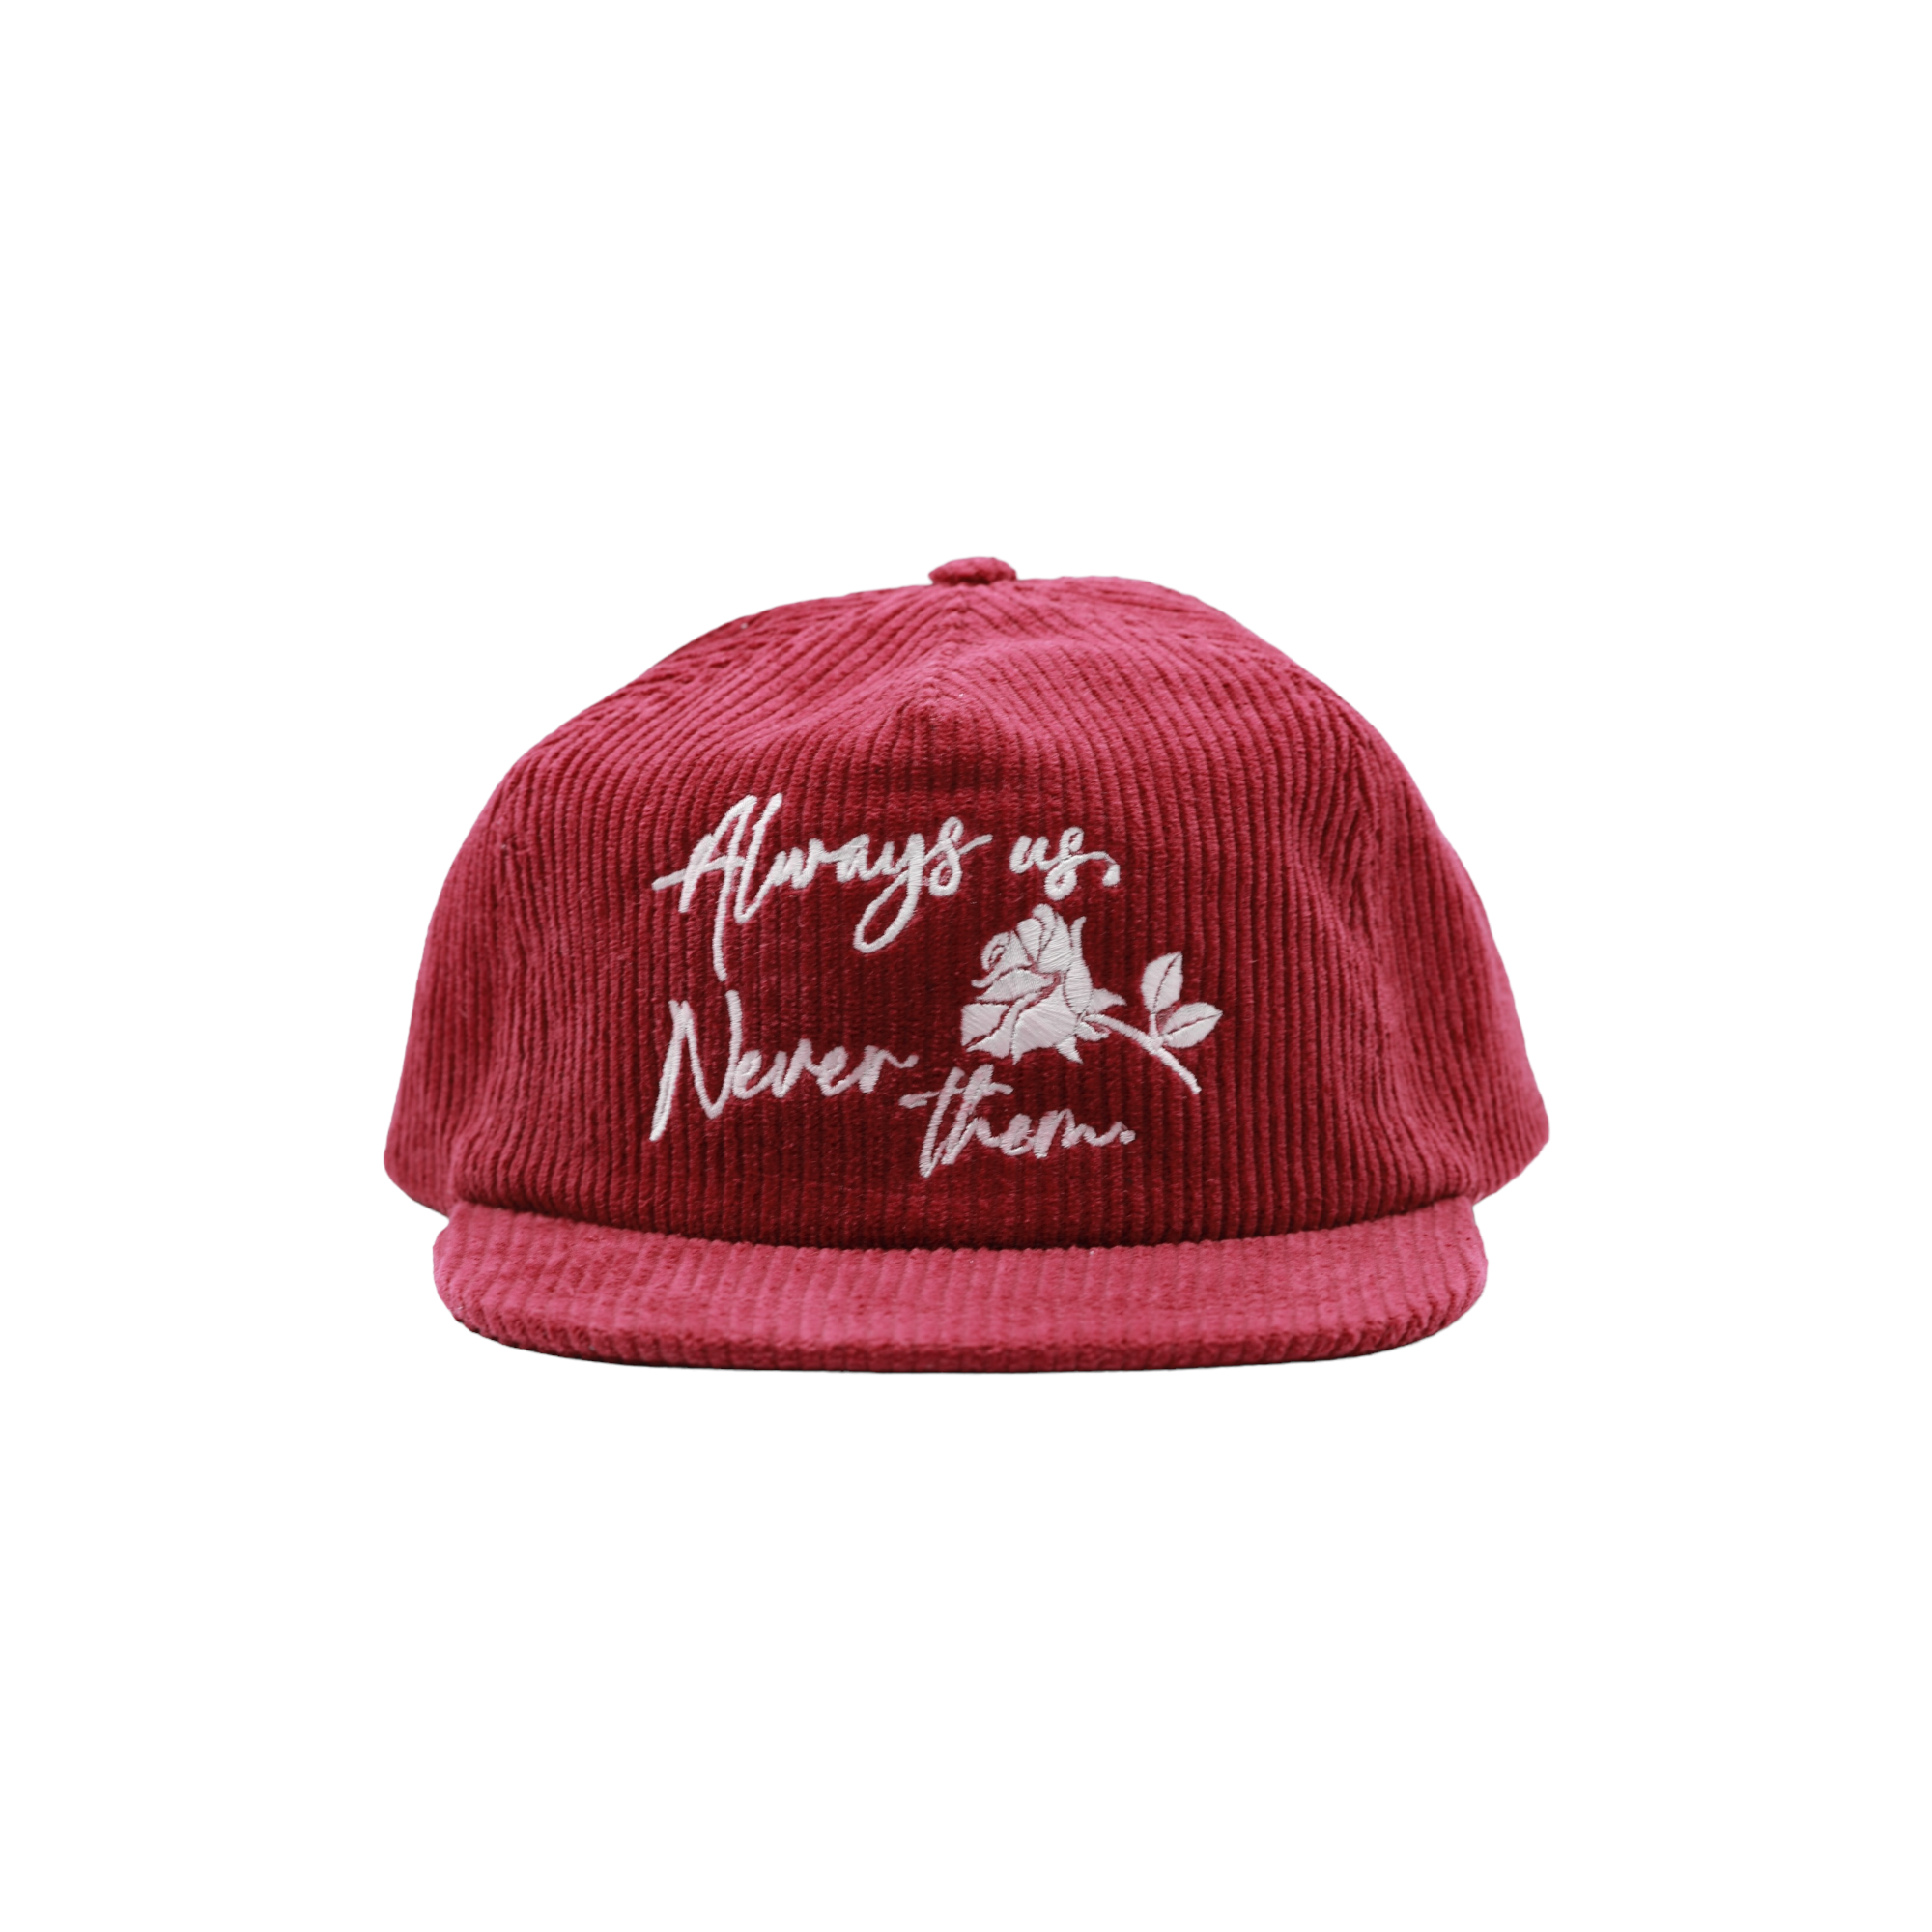 – Us, Painters Corduroy Burgundy Never Them PericoLimited Always - Cap